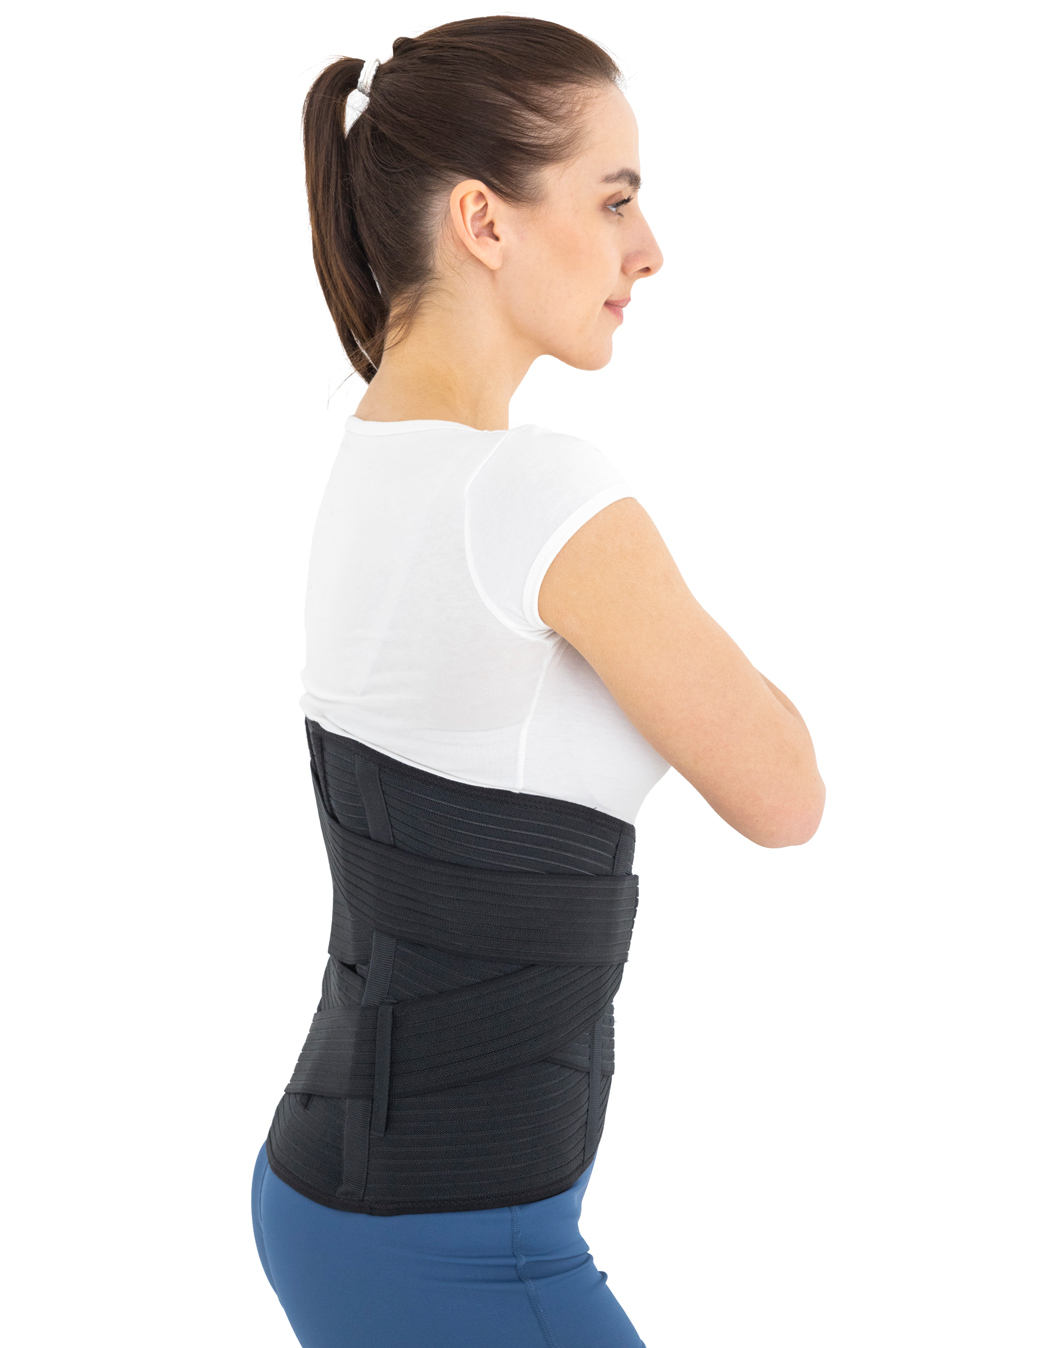 SAMSON T.L.S.O Corset(Thoracic & Lumbo Lace Pull Brace) for Back Support(L,Black)  Back / Lumbar Support - Buy SAMSON T.L.S.O Corset(Thoracic & Lumbo Lace  Pull Brace) for Back Support(L,Black) Back / Lumbar Support